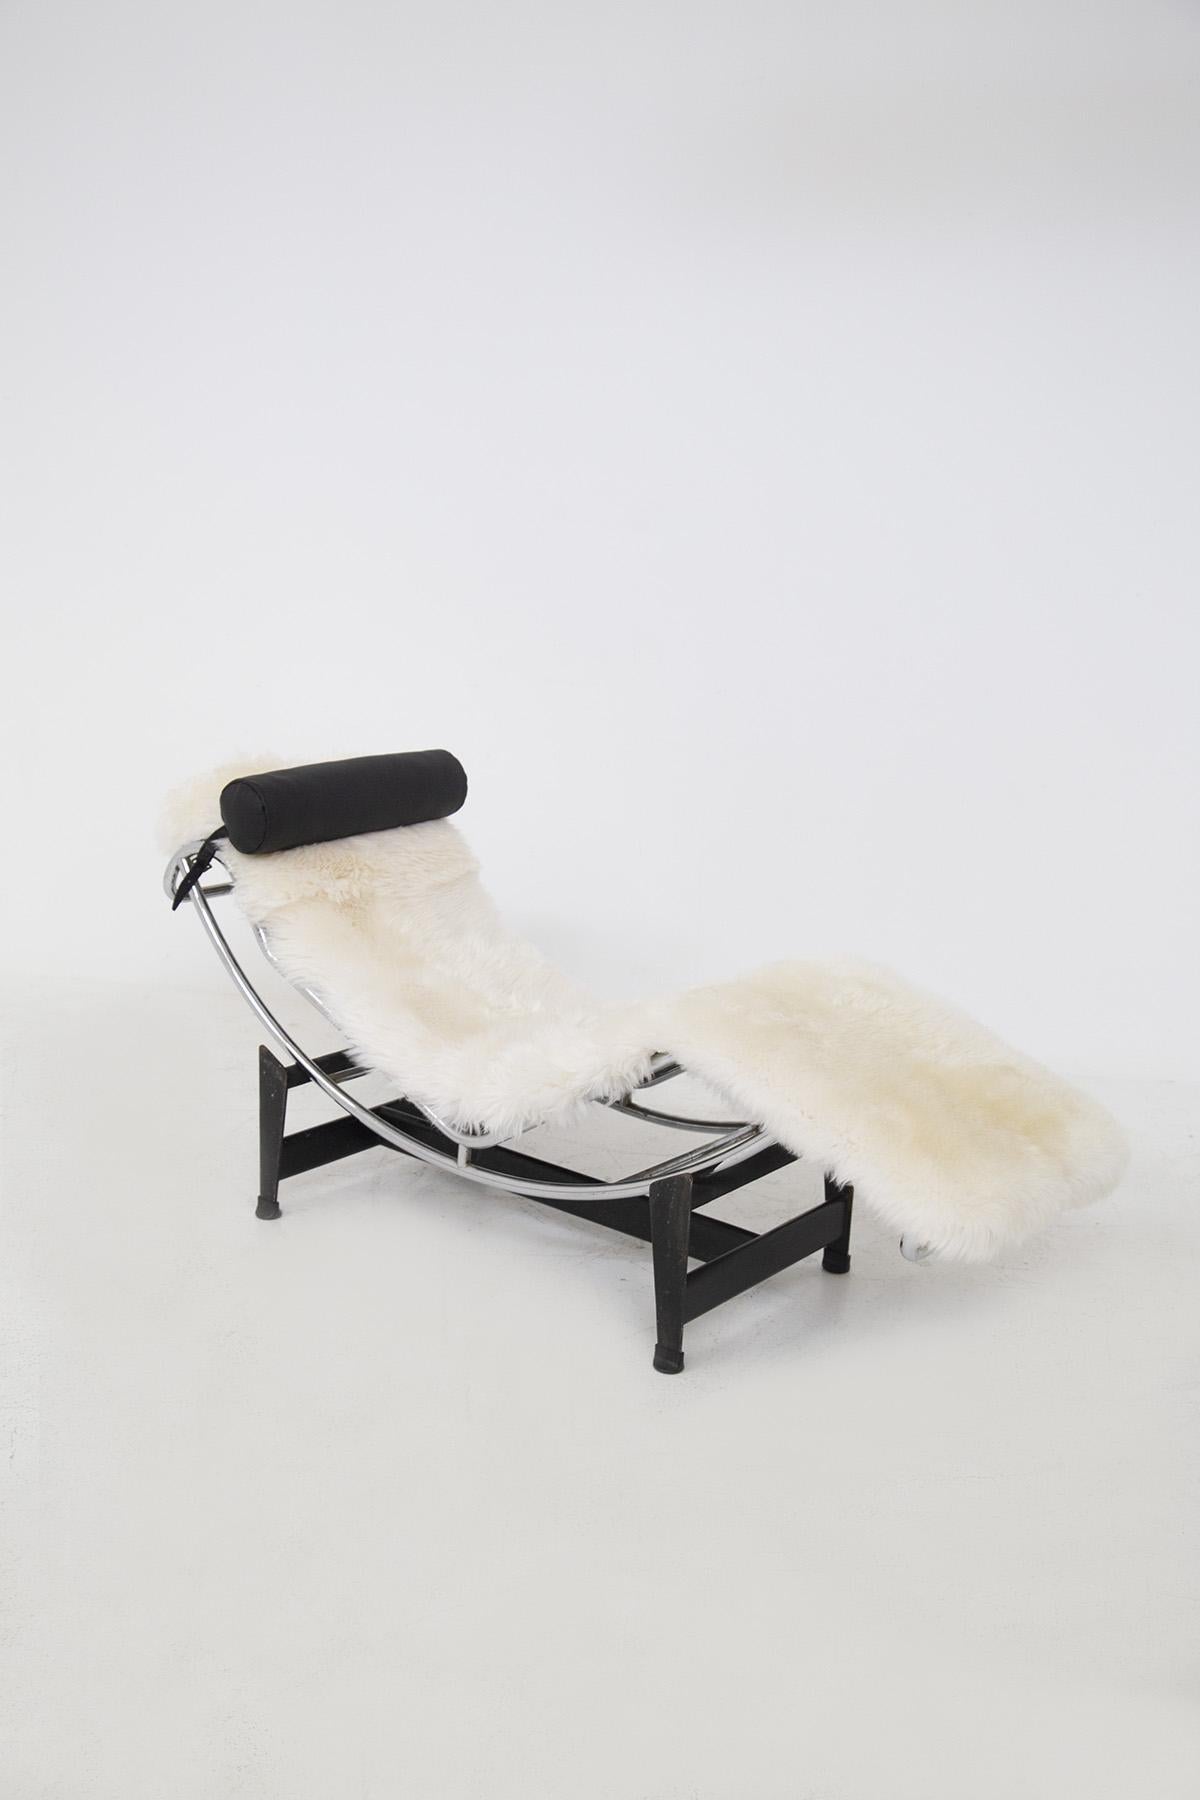 Mid-Century Modern Le Corbusier Chaise Longue in Fur LC4, C. Perriand, P. Jeanneret for Cassina